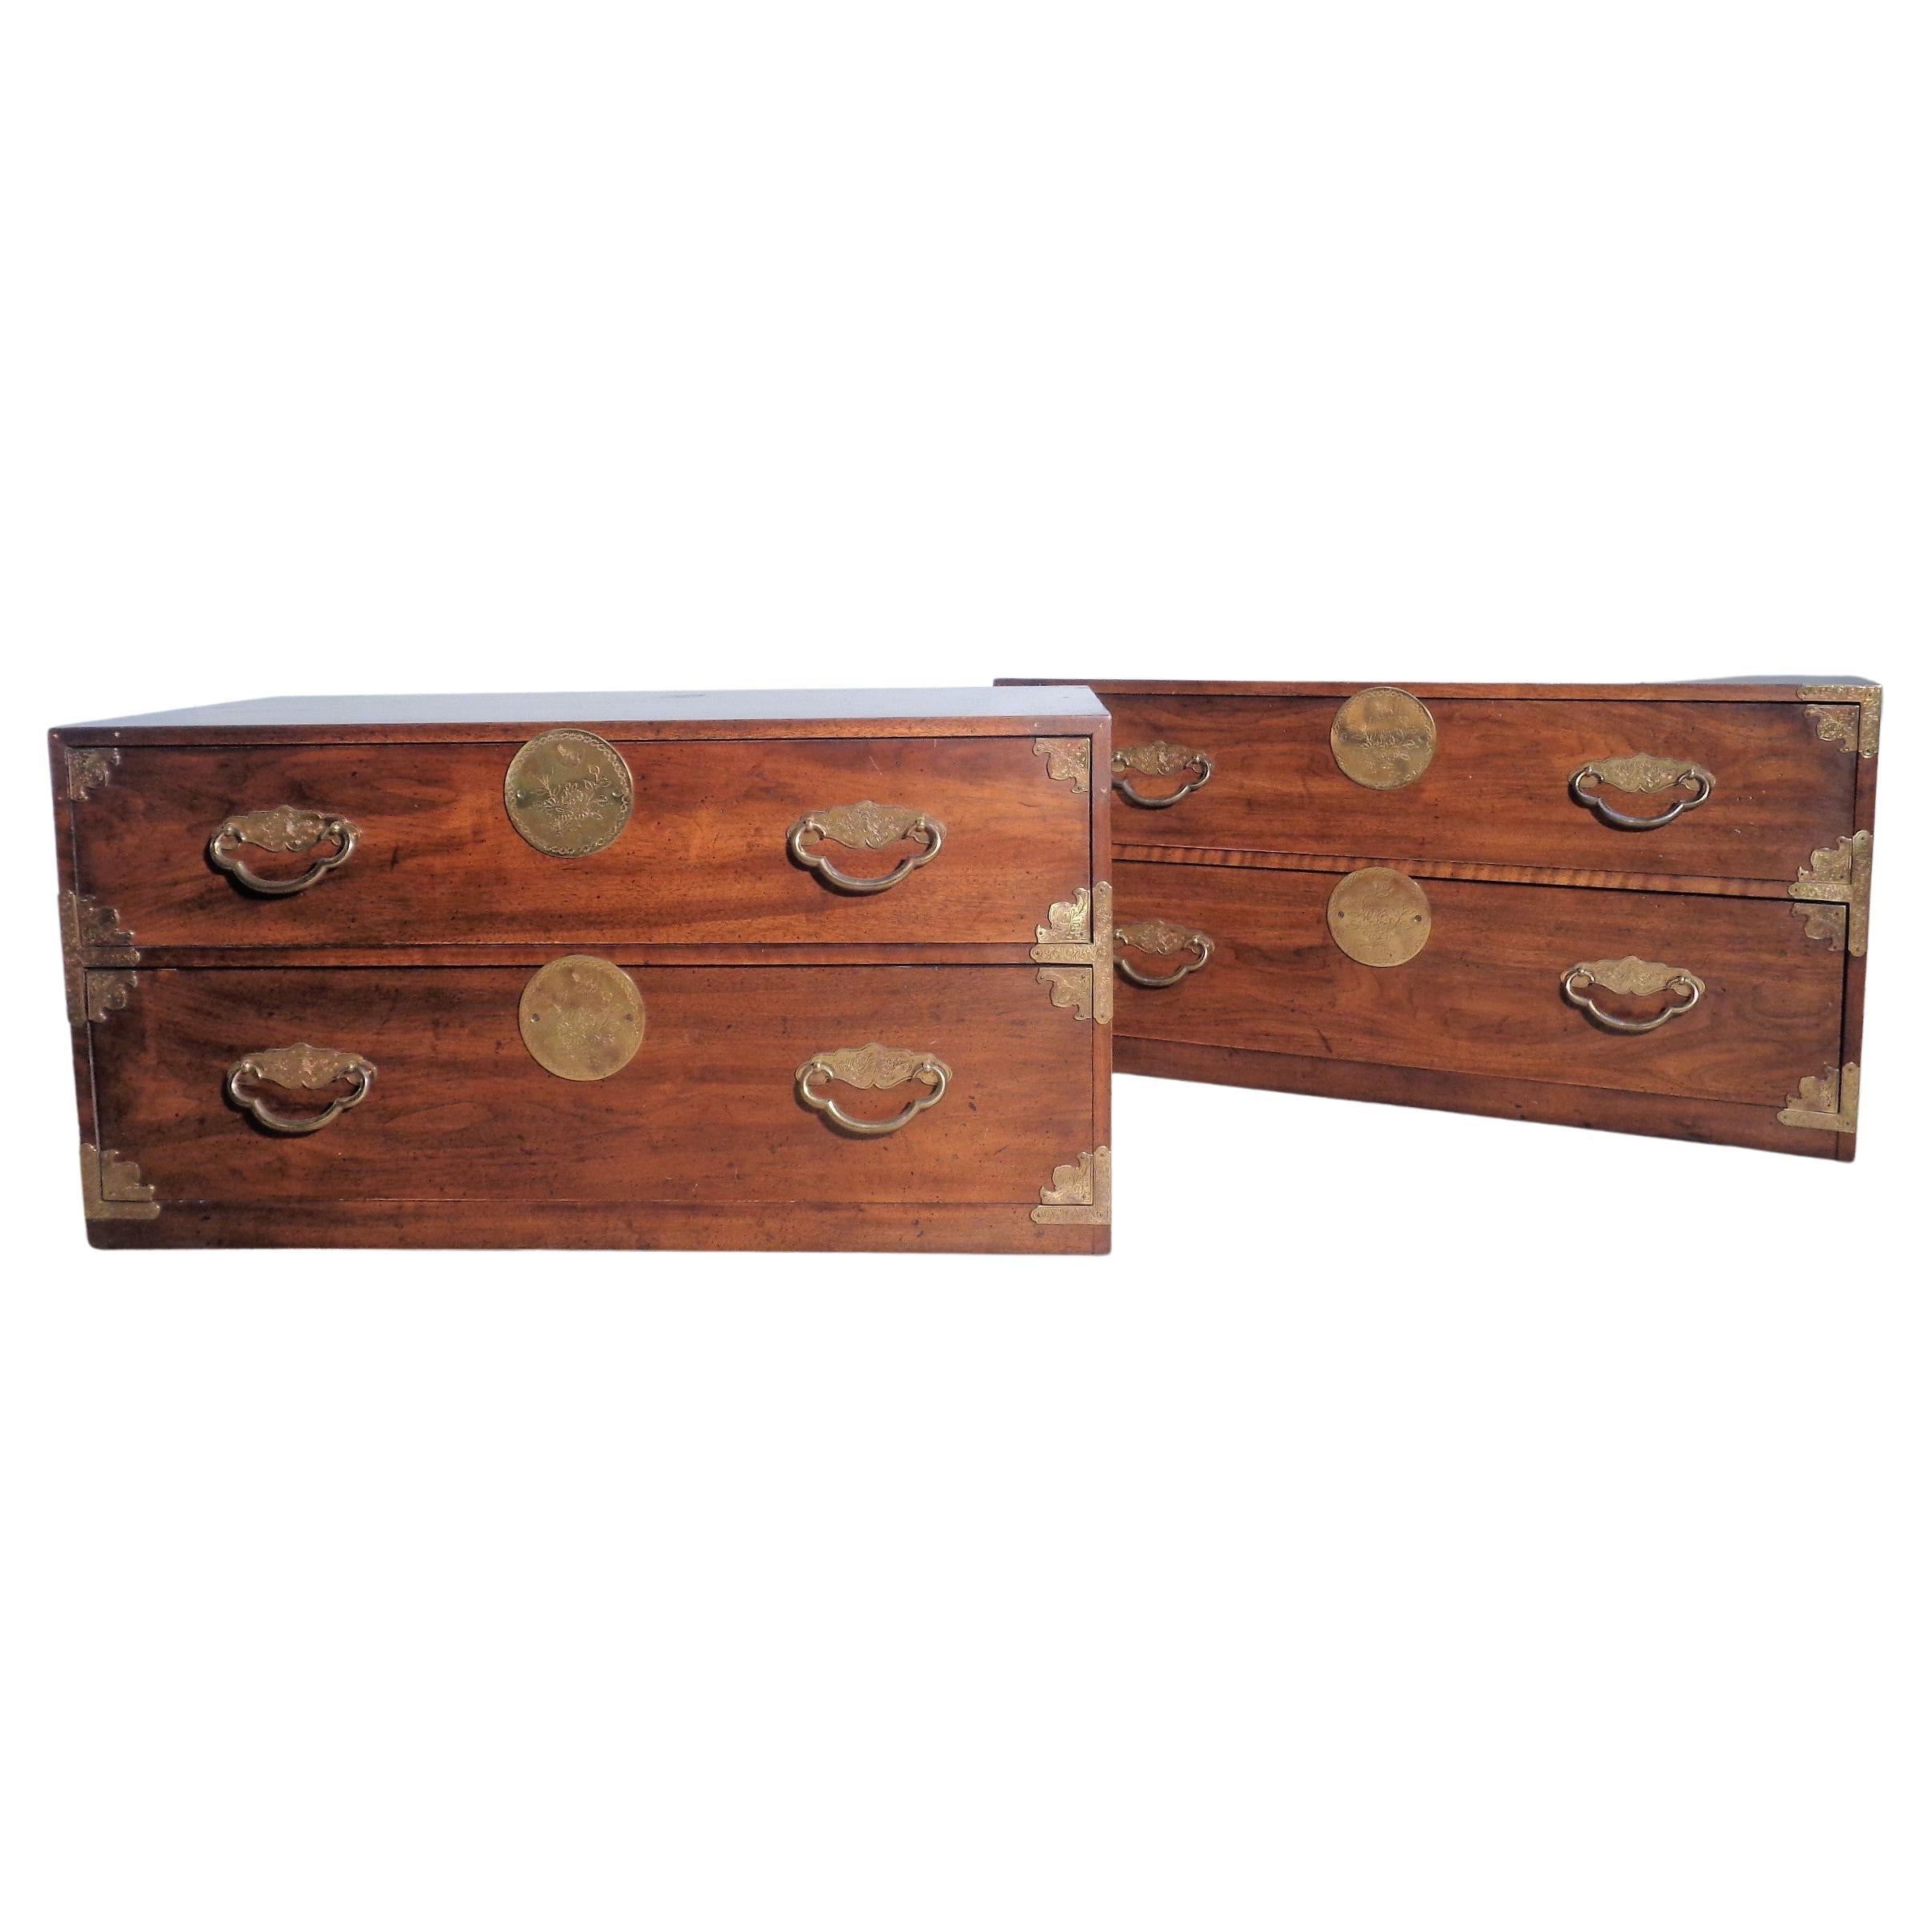 Pair Asian Modern Style Walnut Campaign Chests Henredon, 1970's For Sale 3